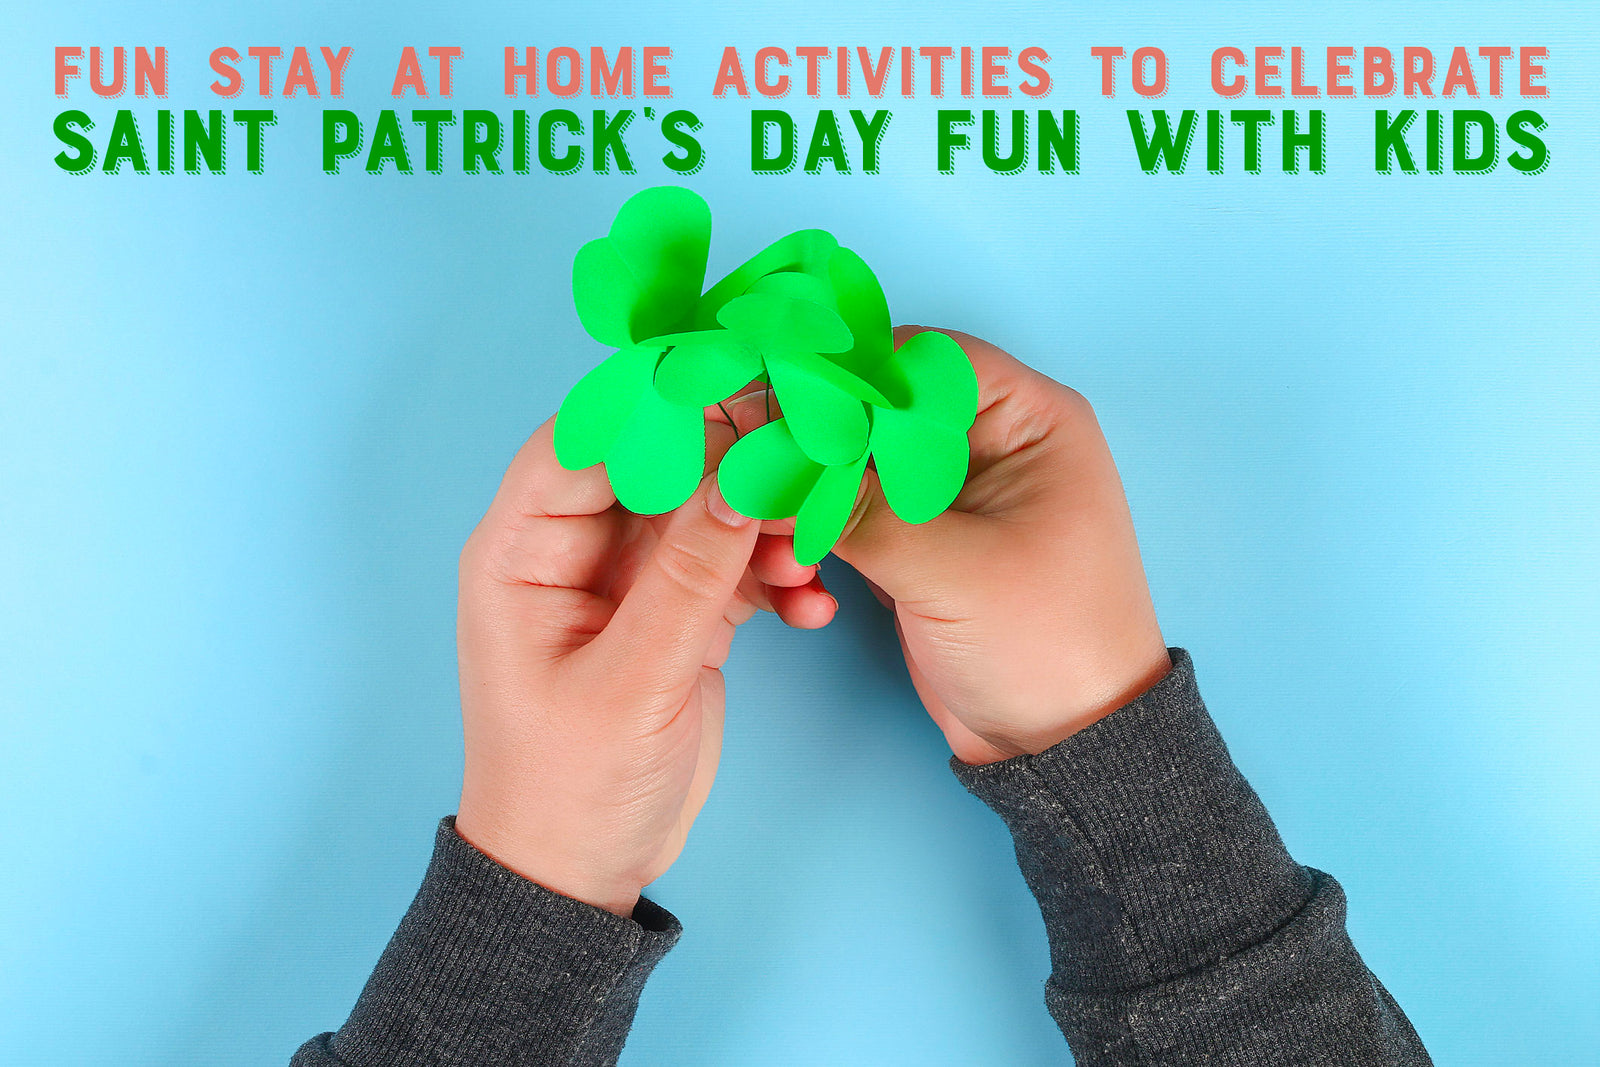 Fun stay at home activities to celebrate St Patrick’s Day fun with kids